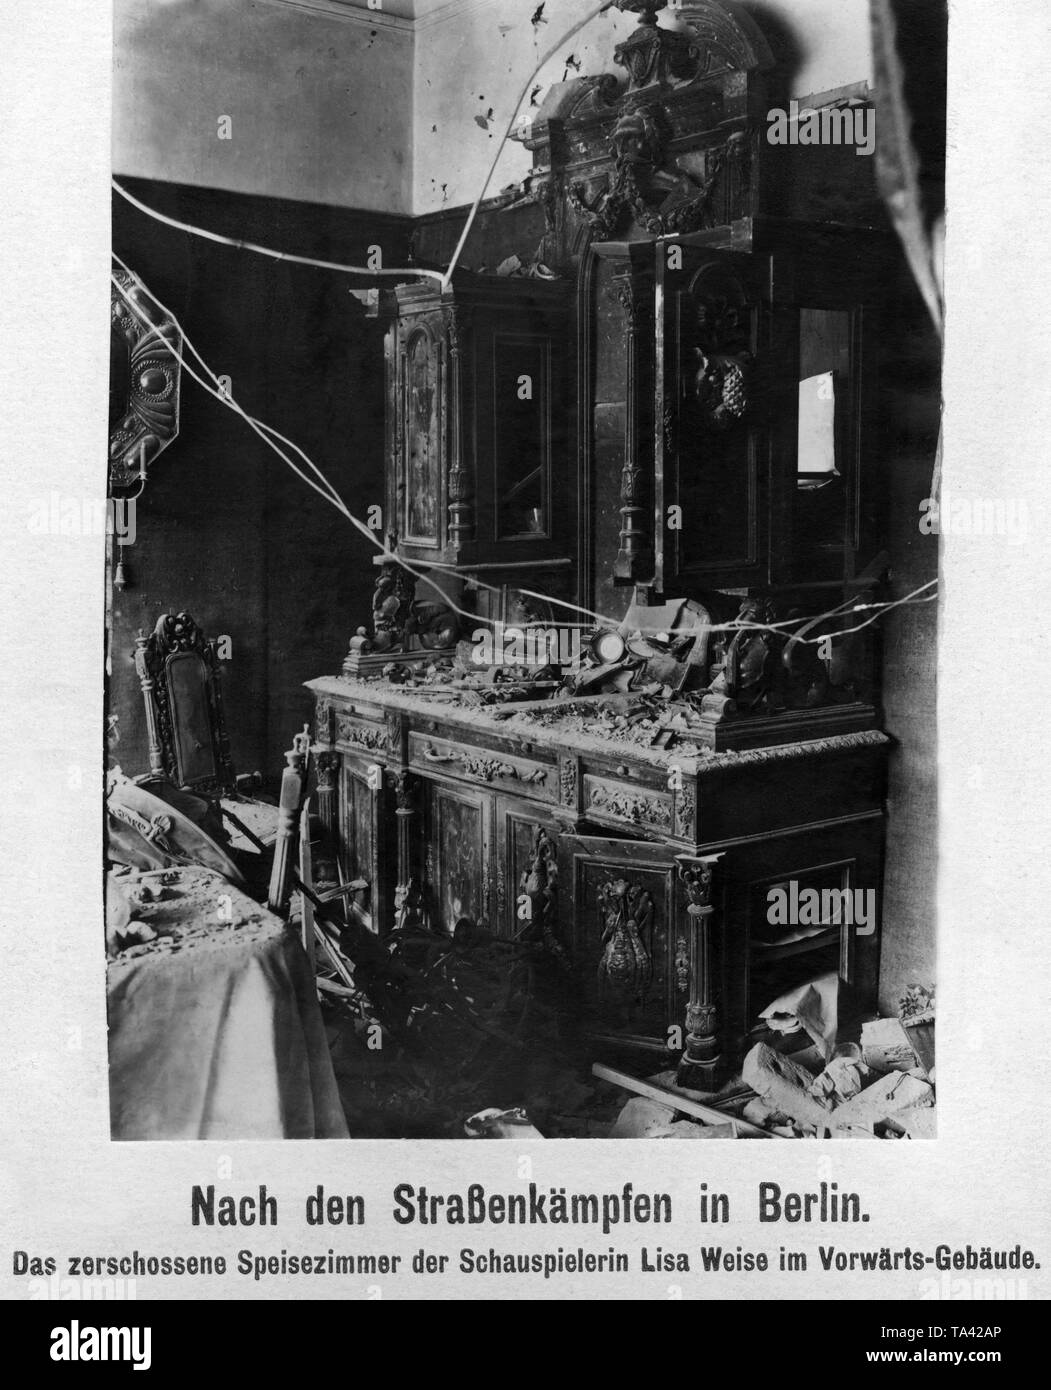 The ruined dining room of the actress Lisa Weise at Lindenstrasse 3. The 'Vorwaerts, the central body of the SPD, had its seat in the same building. During the January uprising, there were armed conflicts between left-wing revolutionaries and government-loyal Freikorps units in the Berlin Zeitungsviertel (newspaper quarter). Stock Photo